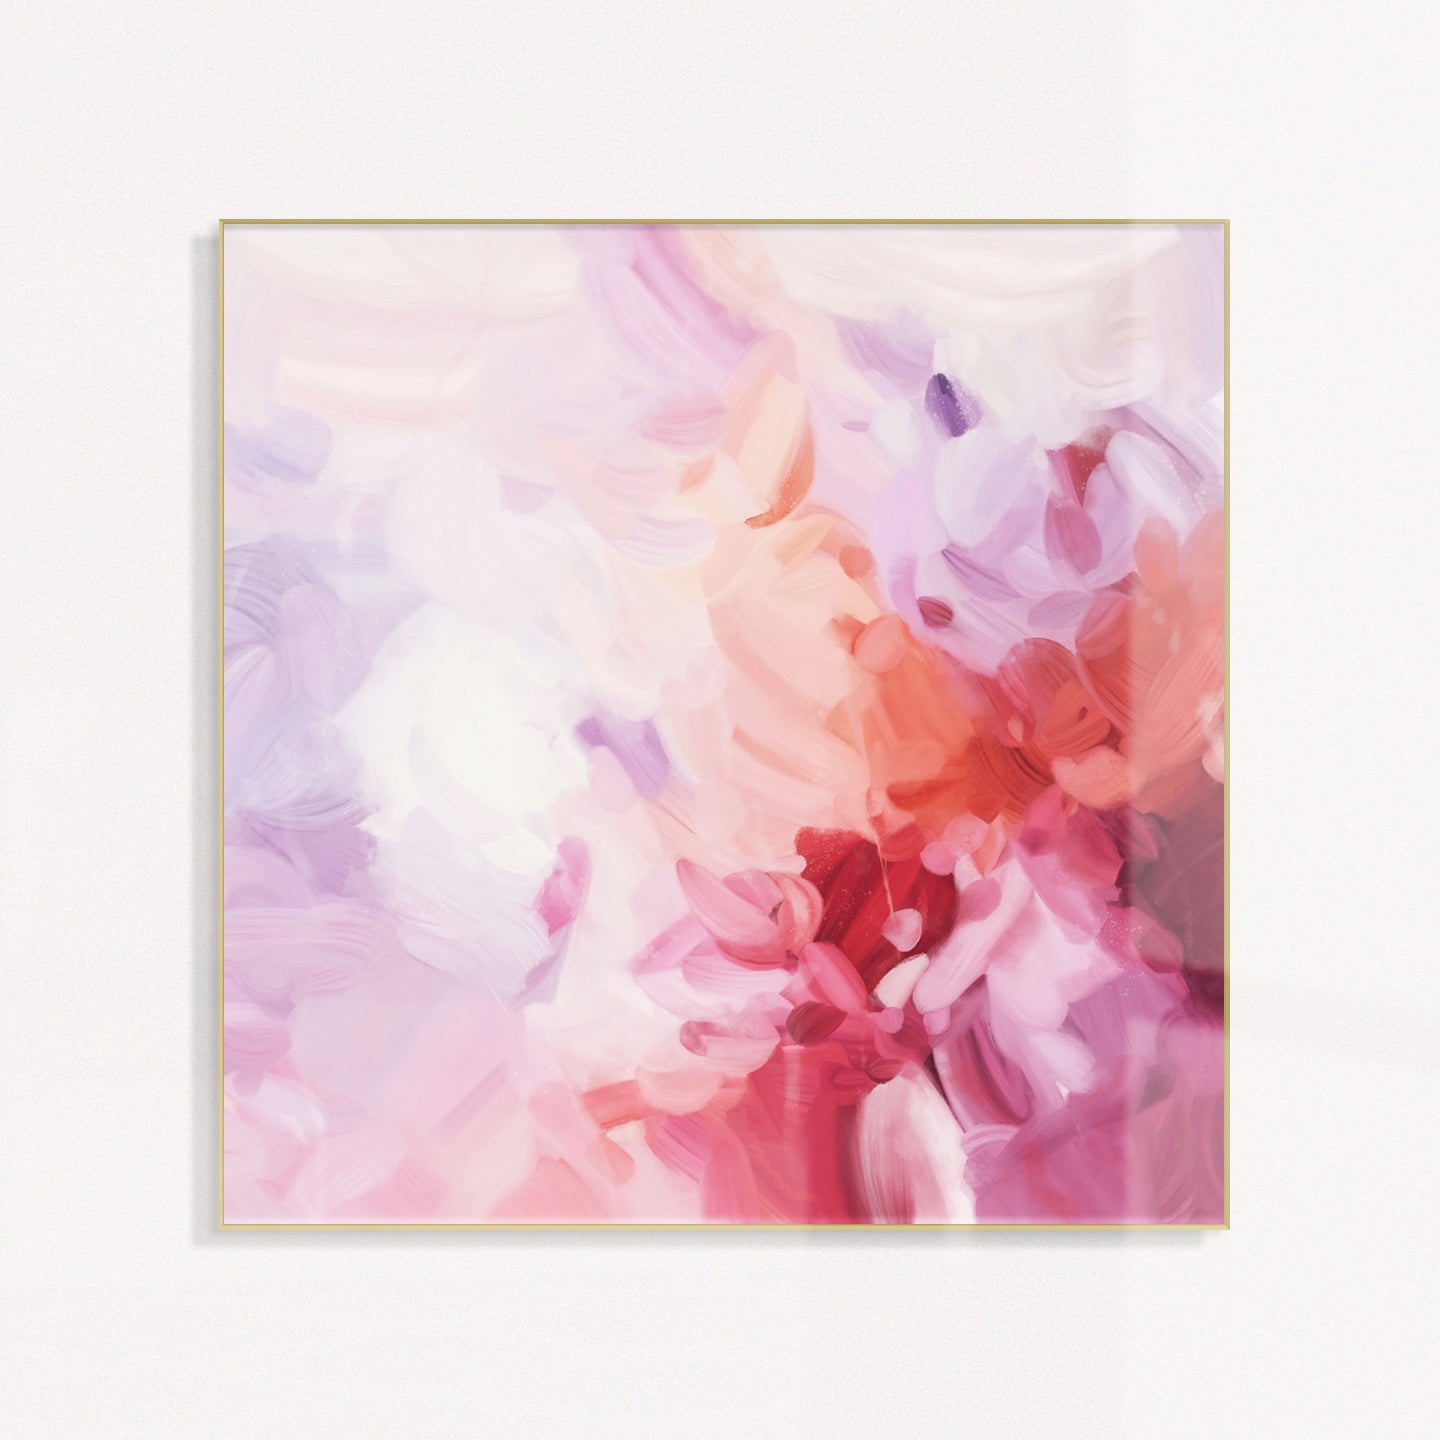 Aerial, pink and purple abstract art - wall art by Parima Studio